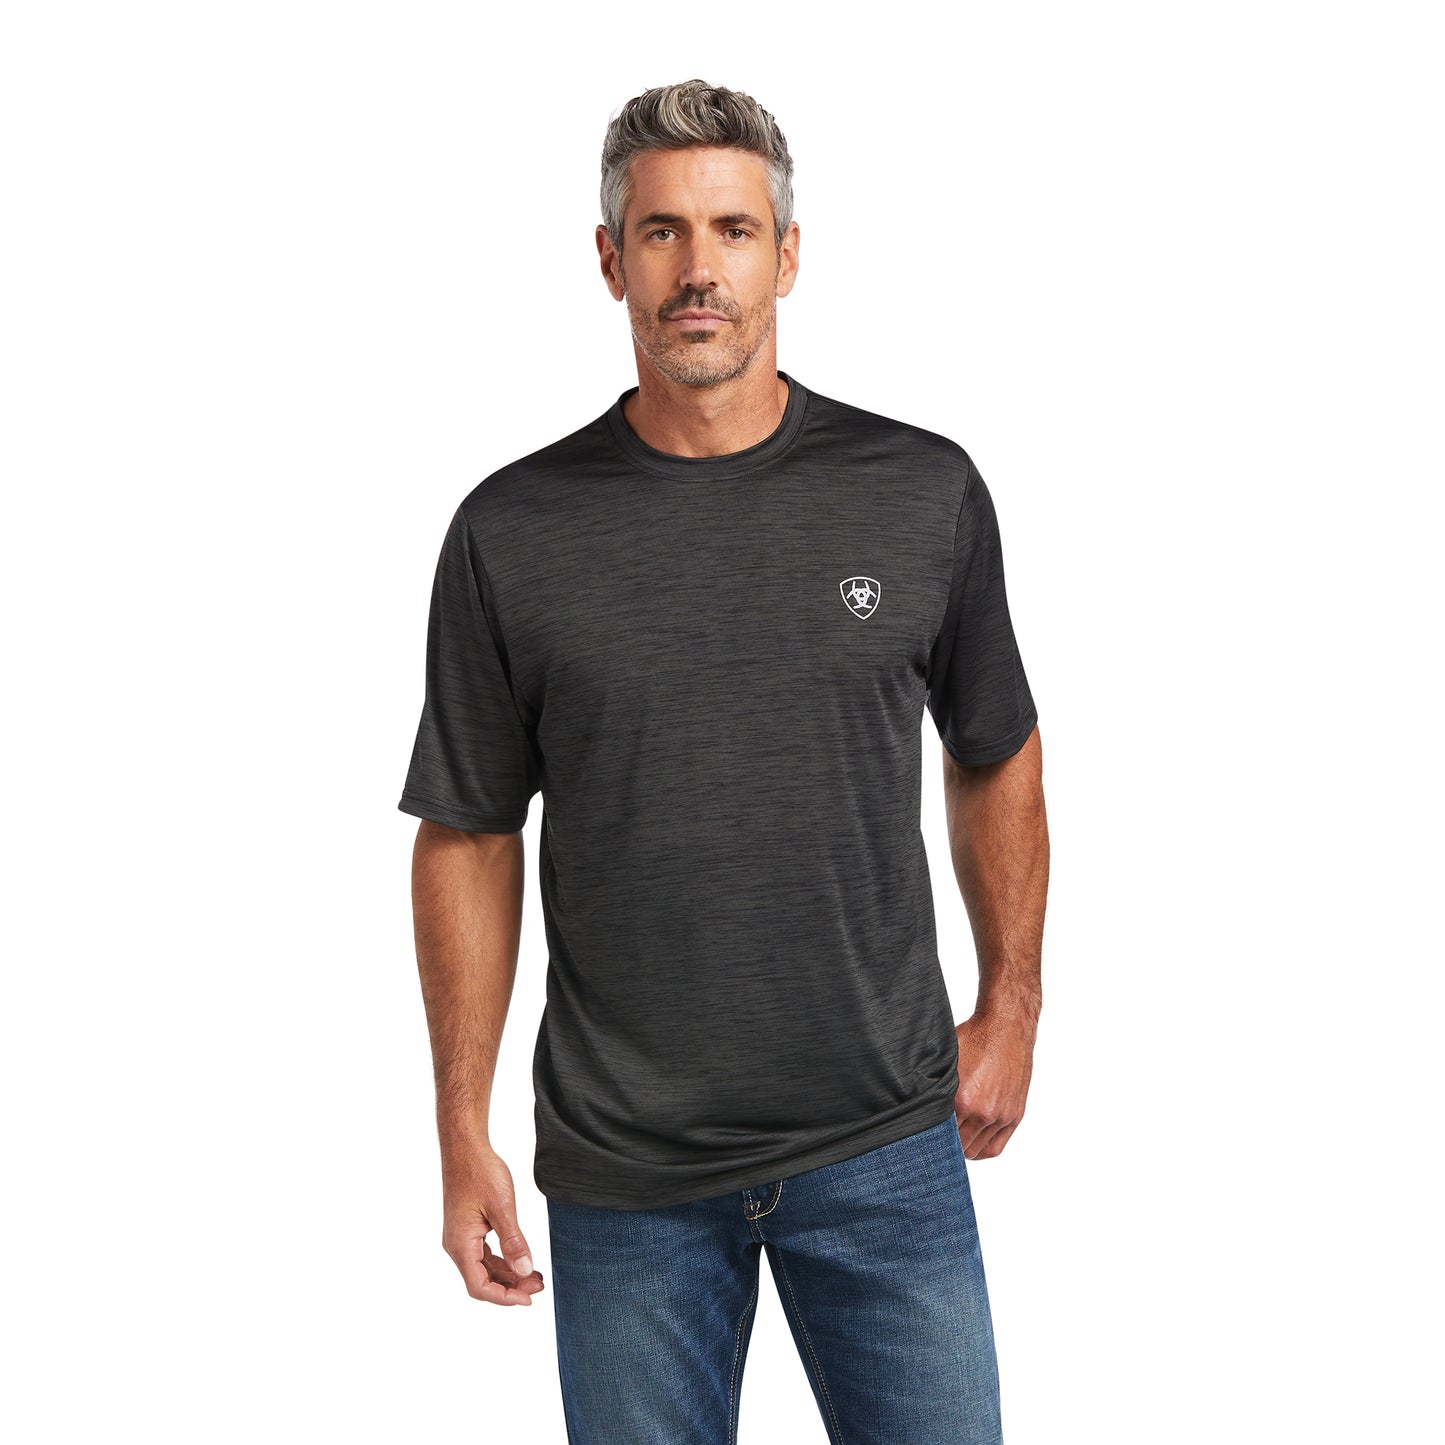 Ariat® Men's Charger Vertical Flag Charcoal Short Sleeve Tee 10039553